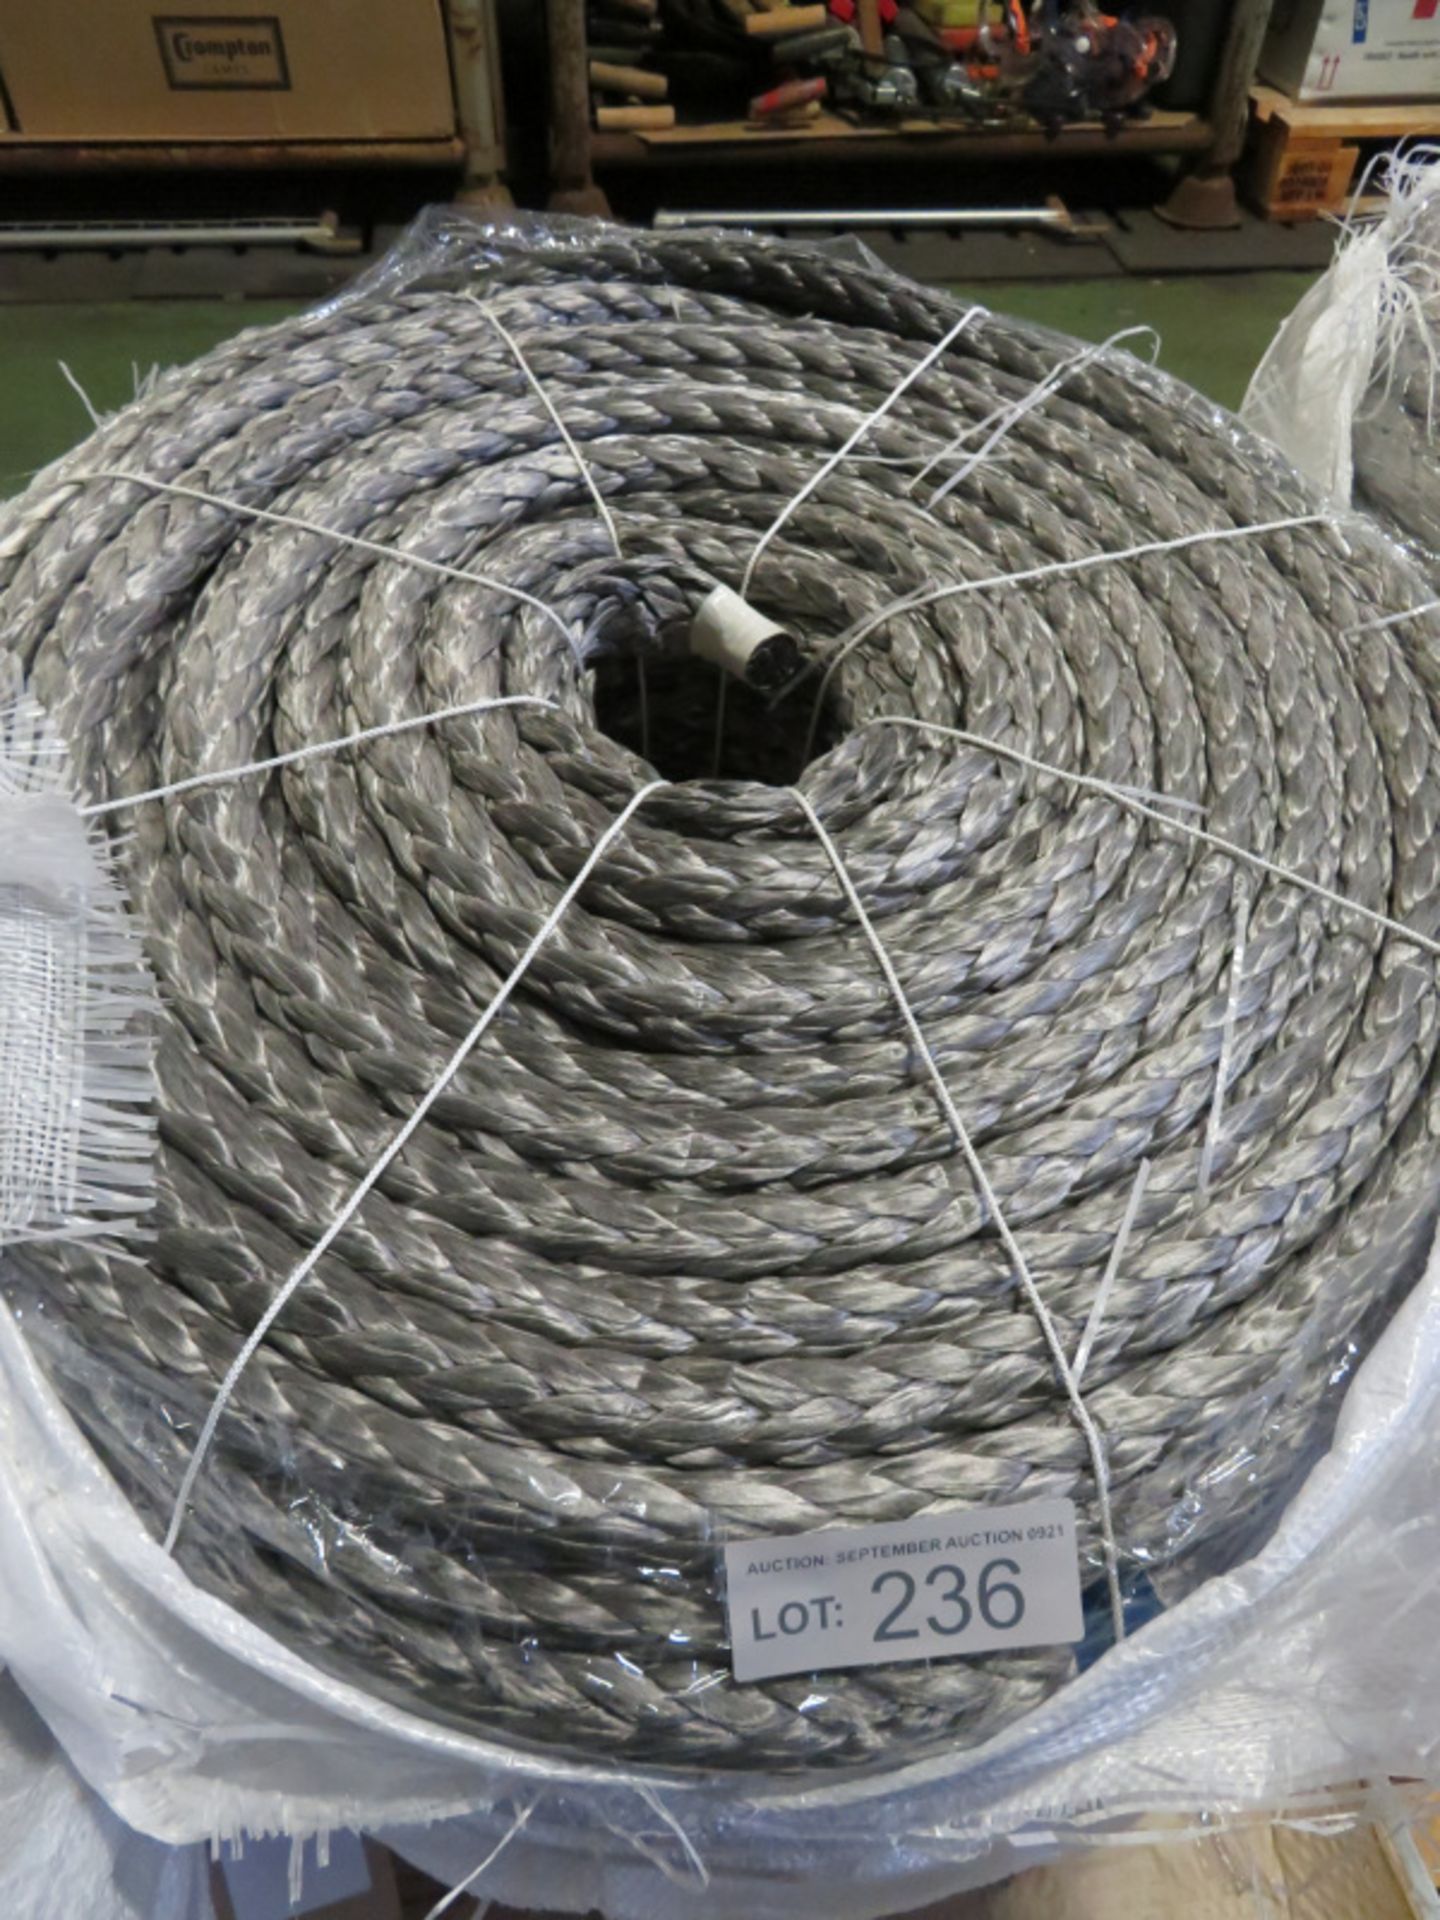 Marlow HMPE Rope 22mm x 220M - Grey - Image 2 of 2